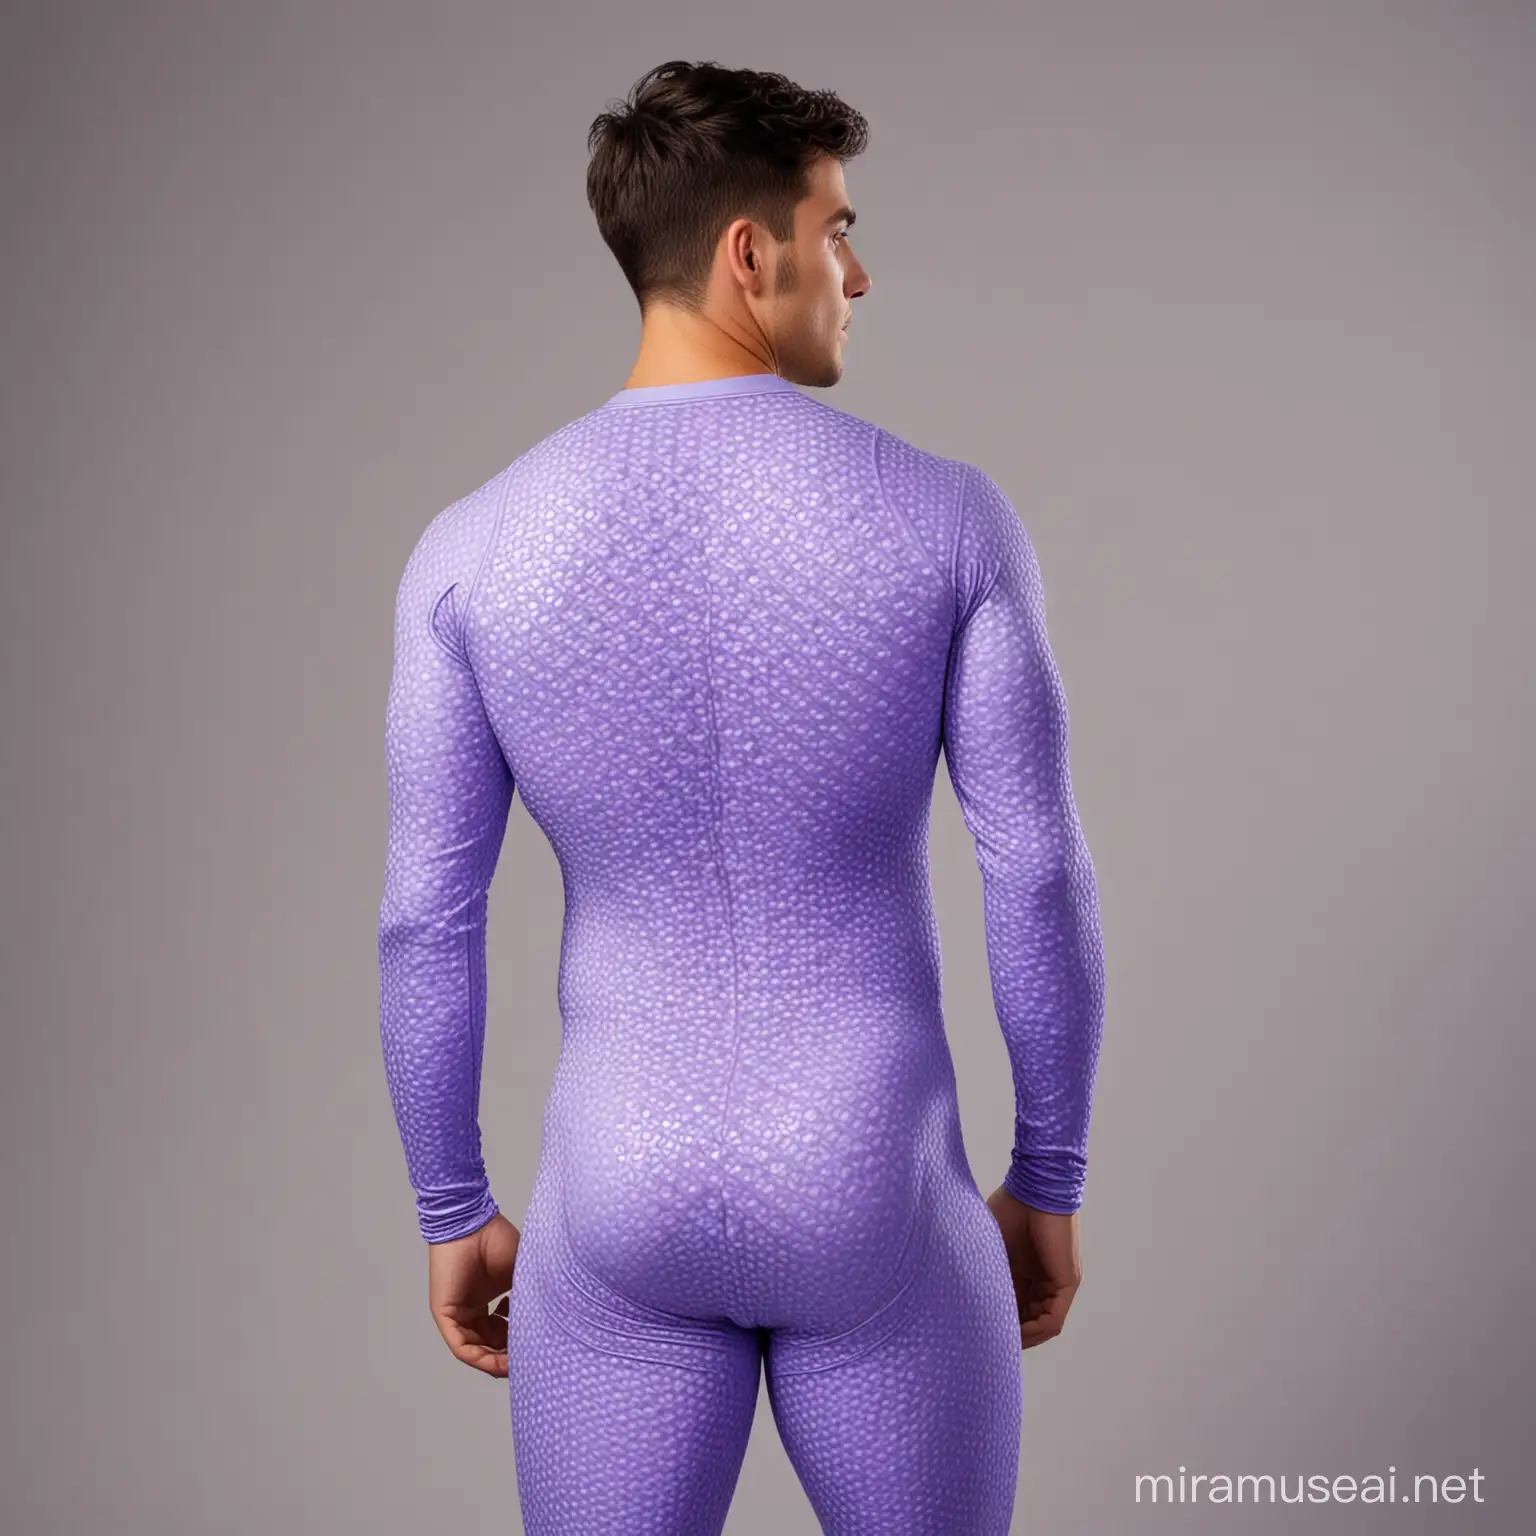 Dashing American Hero in Periwinkle Spandex Suit with Honeycomb Pattern